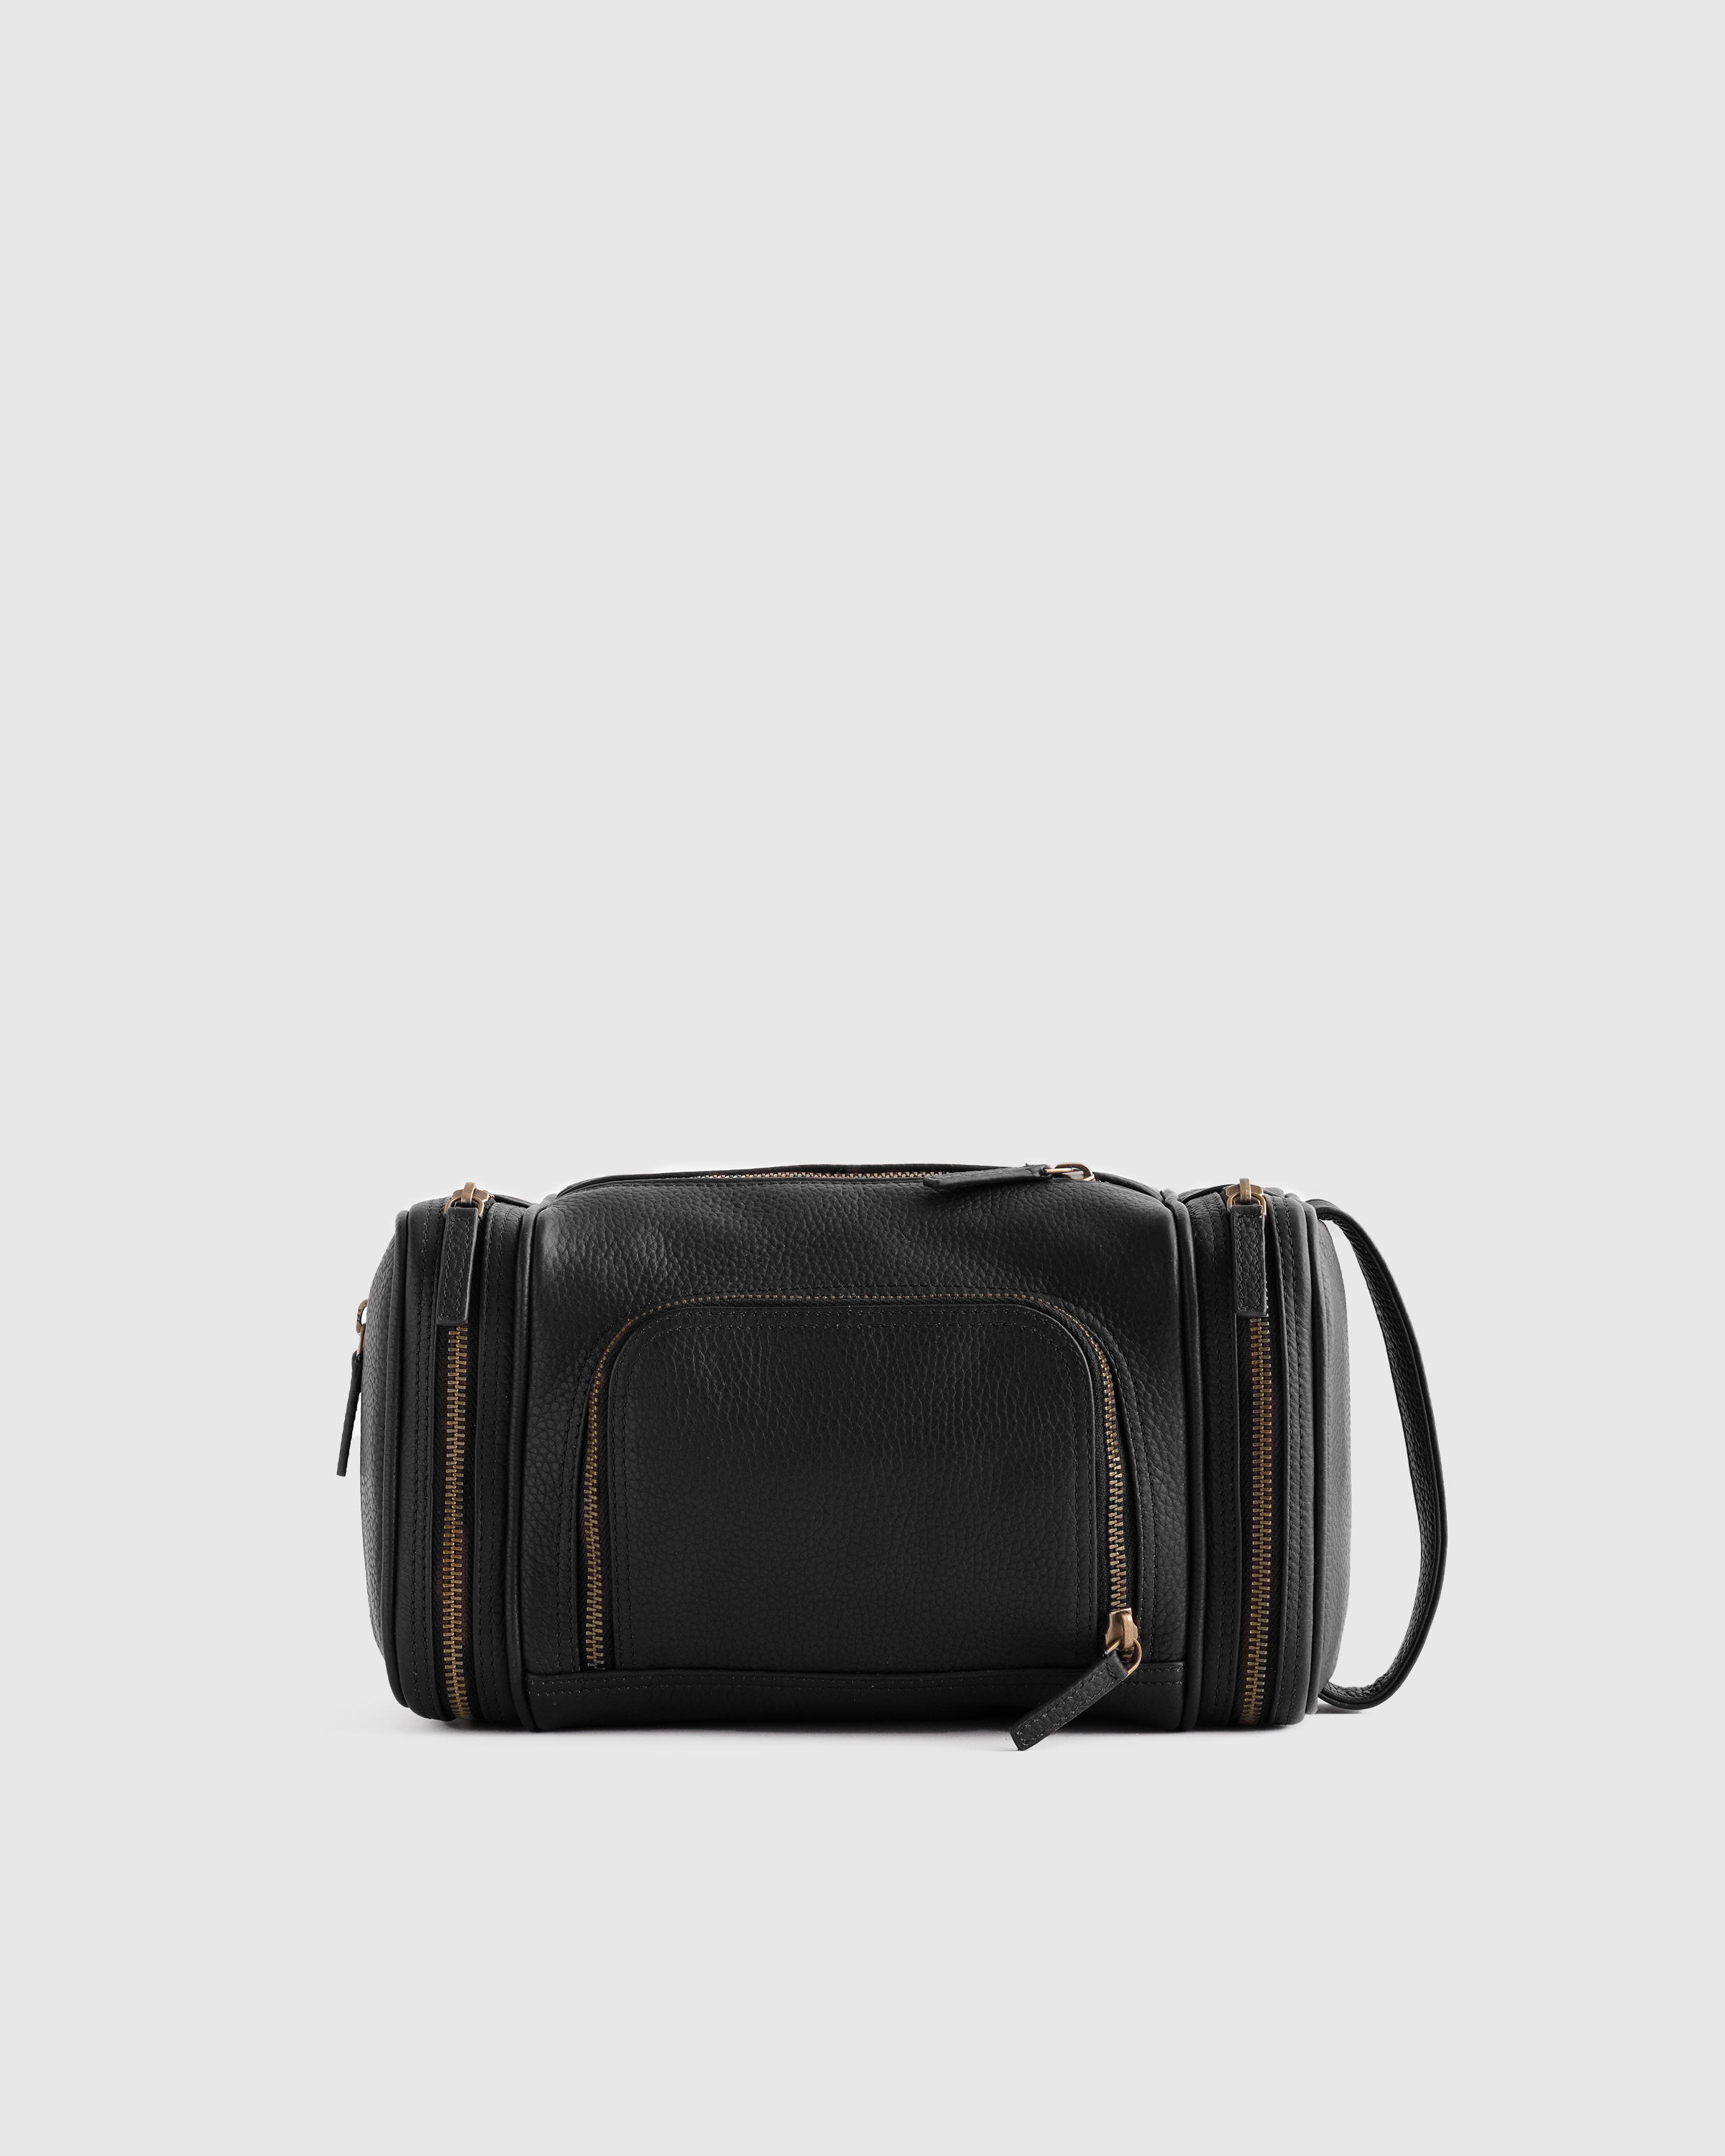 Quince Men's Nappa Leather Toiletry Bag In Black